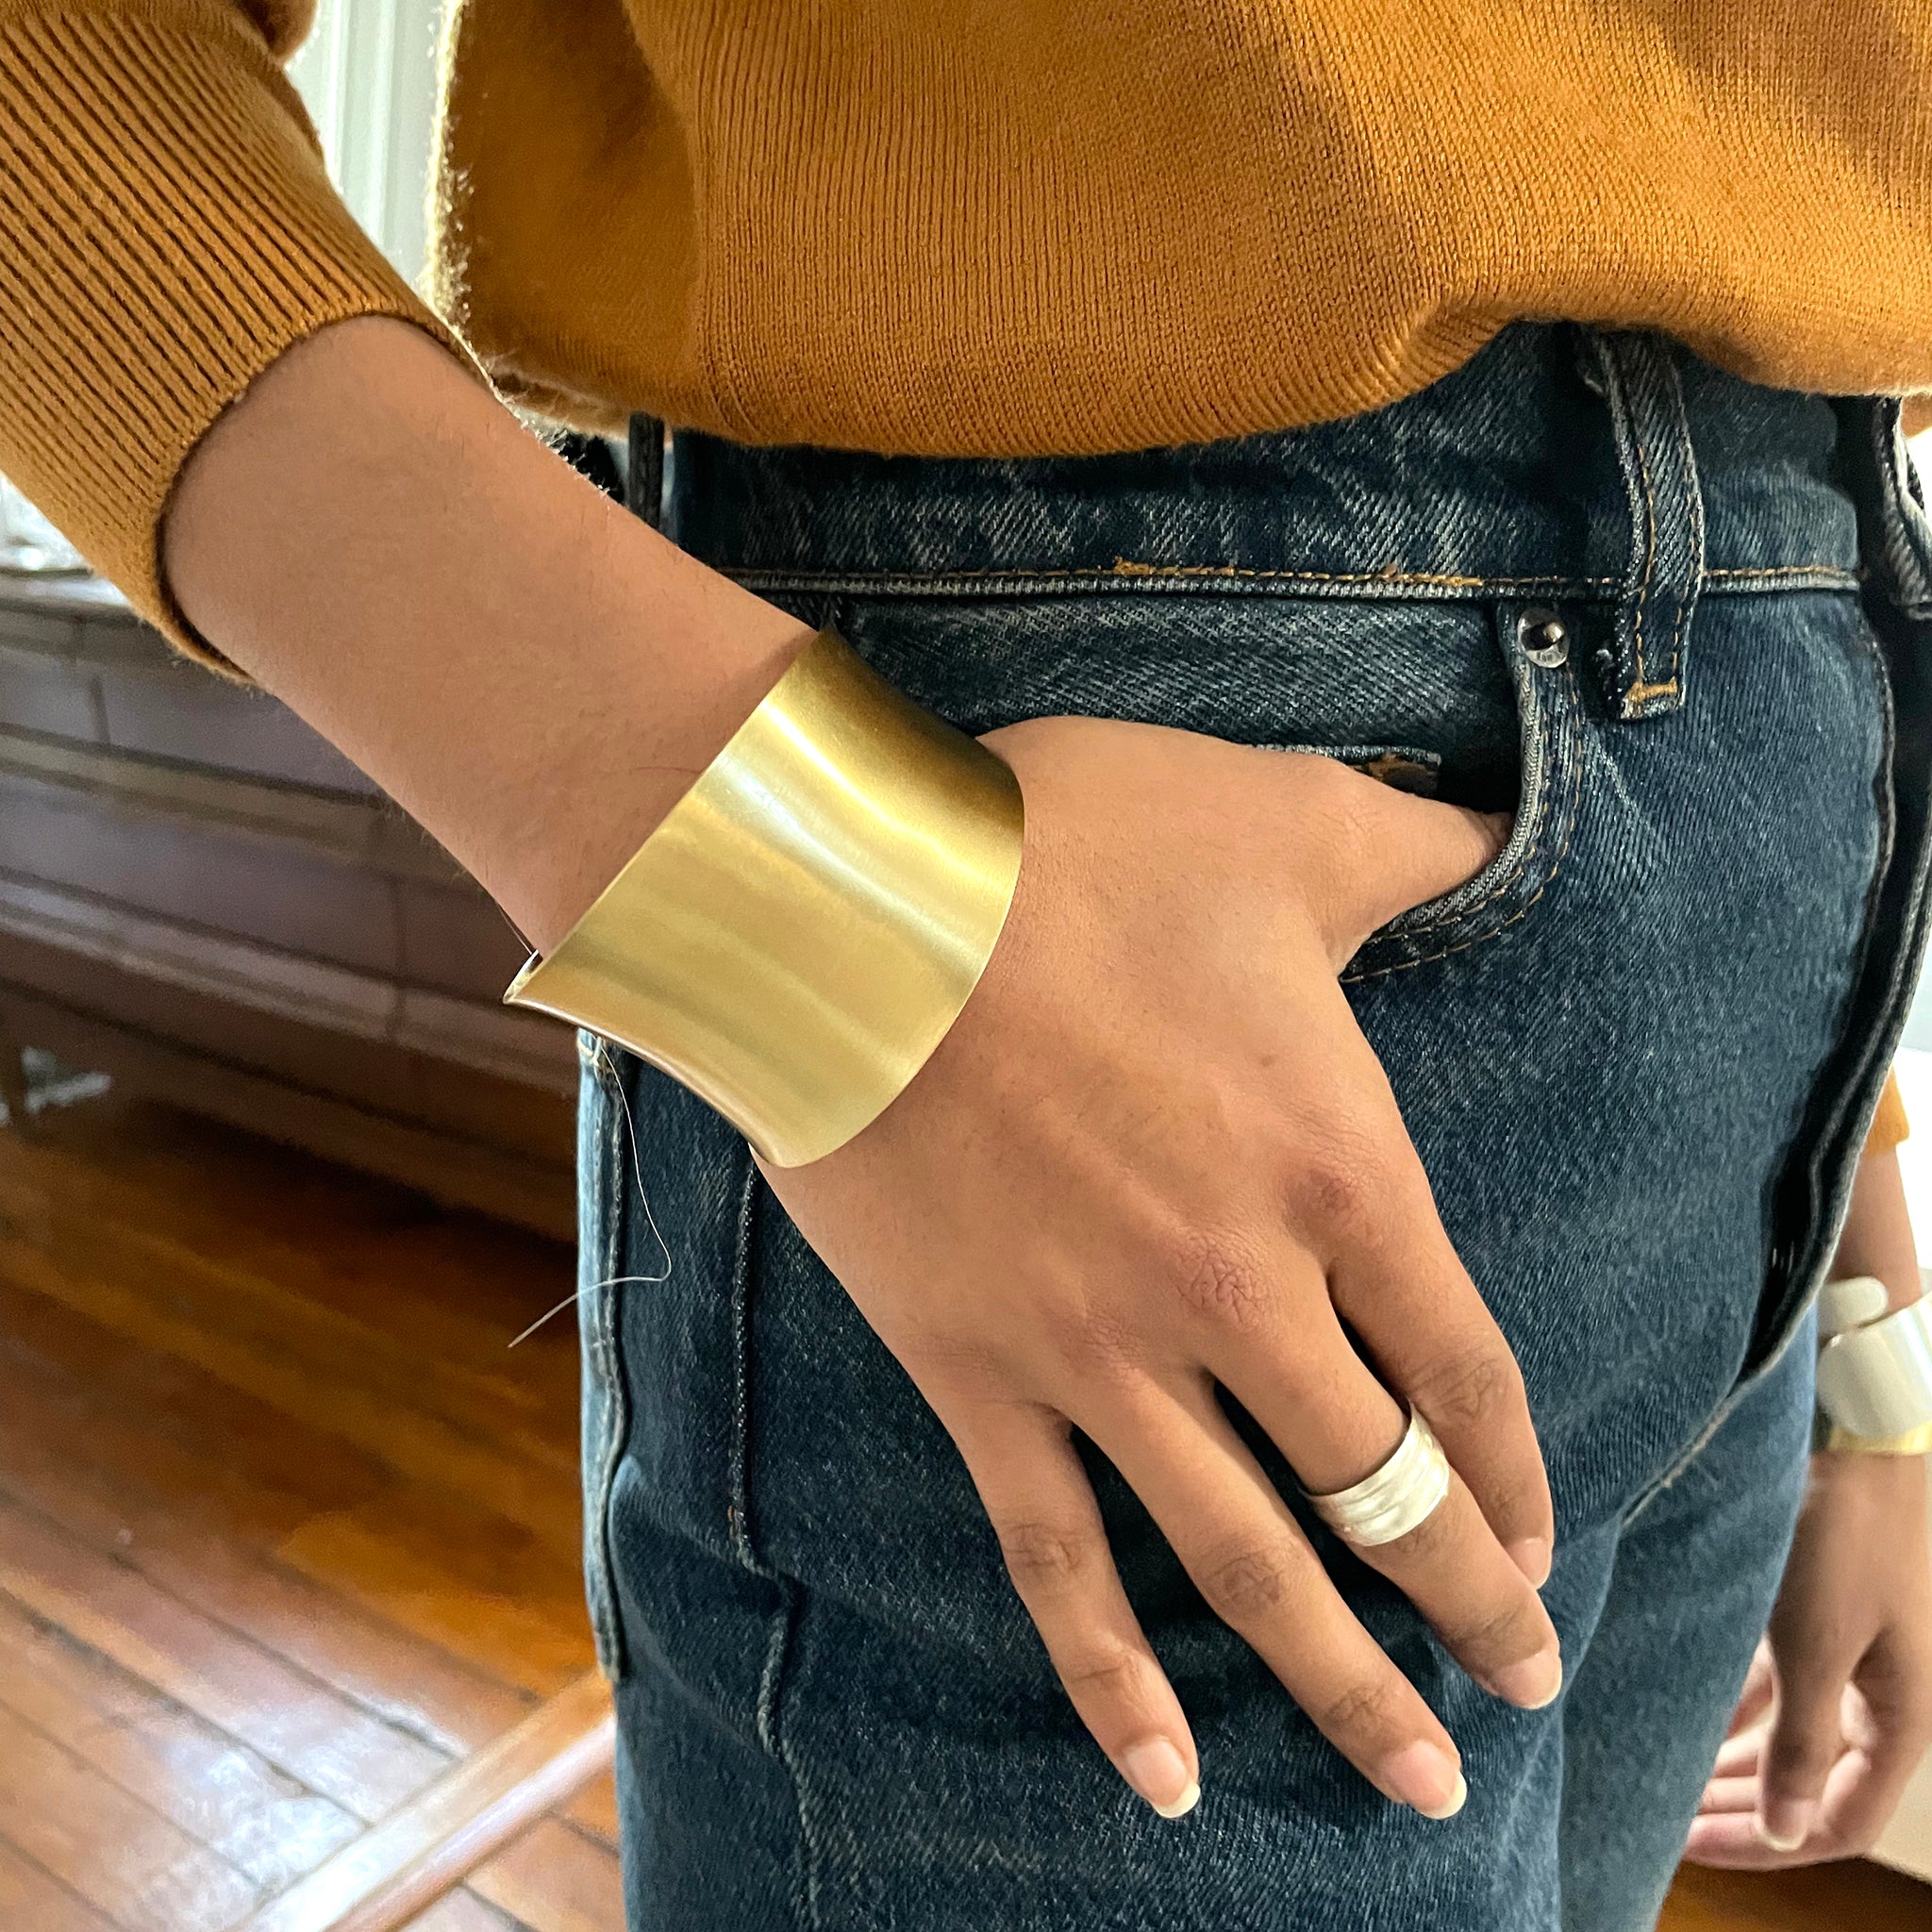 A woman's hand rests on her pant's pocket and her wrist is adorned with a gold cuff.